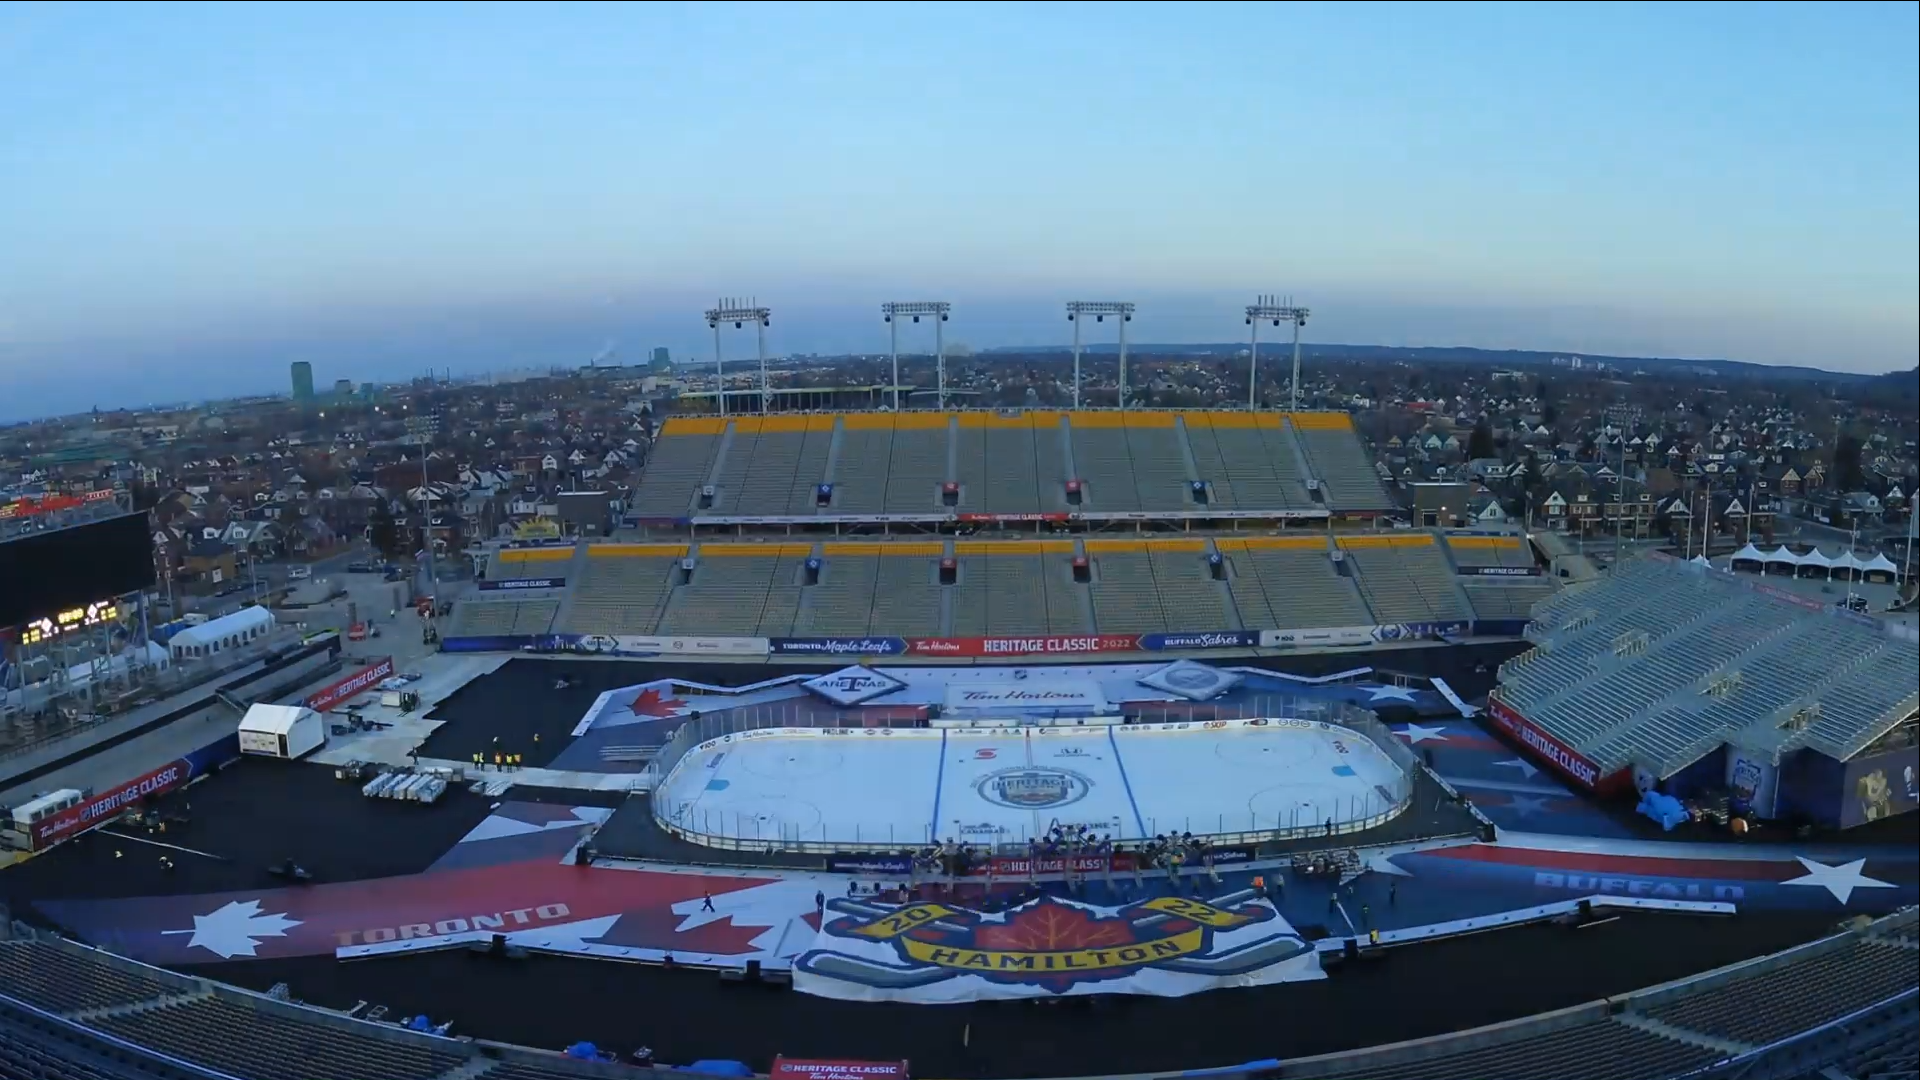 2022 NHL Heritage Classic Officially To Be Played In Hamilton